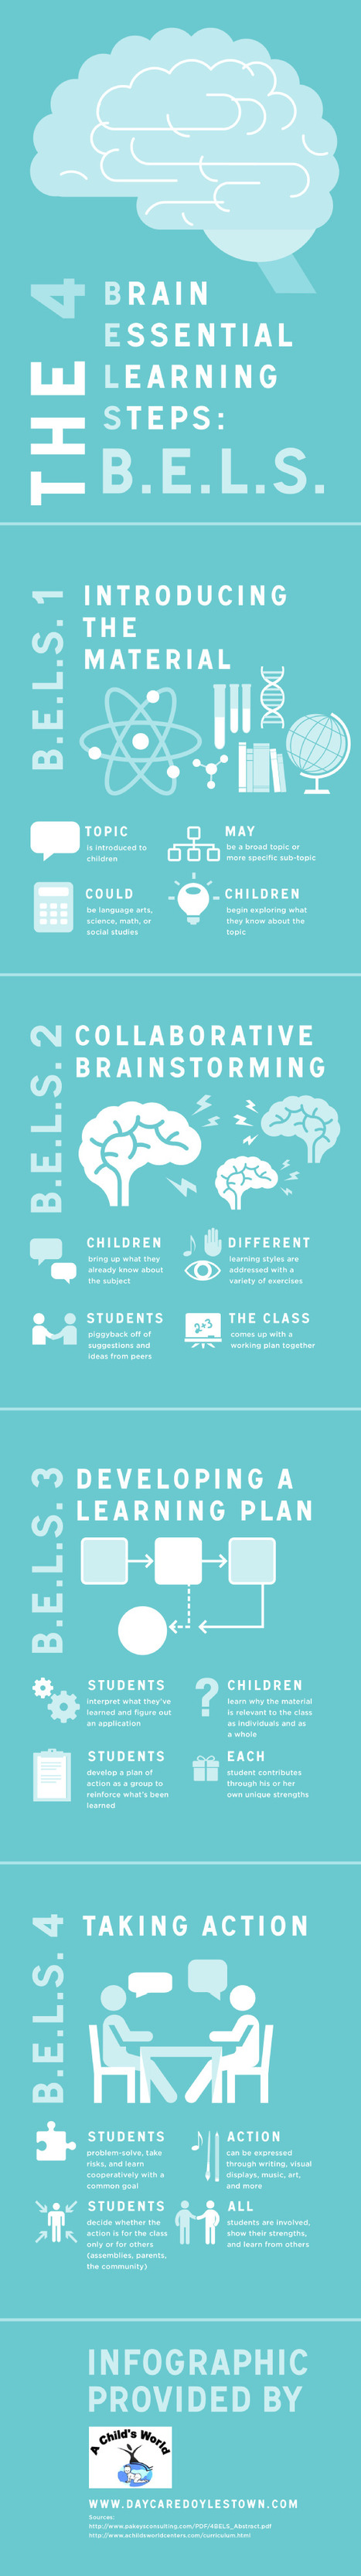 The 4 Brain Essential Learning Steps [Infographic] | Latest Social Media News | Scoop.it